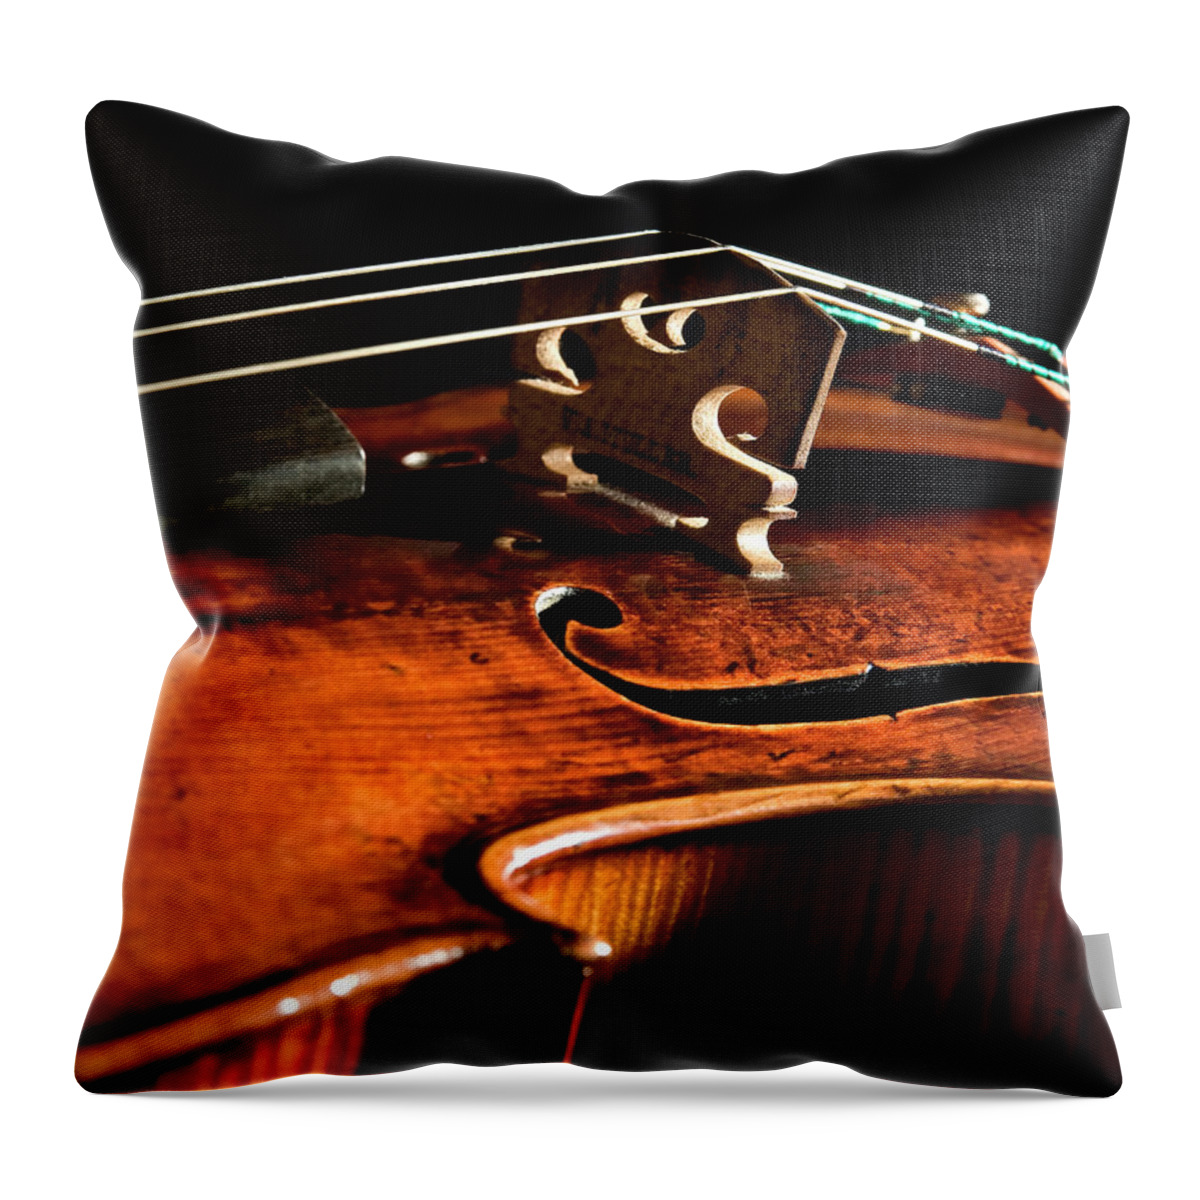 Strad Throw Pillow featuring the photograph Stradivarius by Endre Balogh